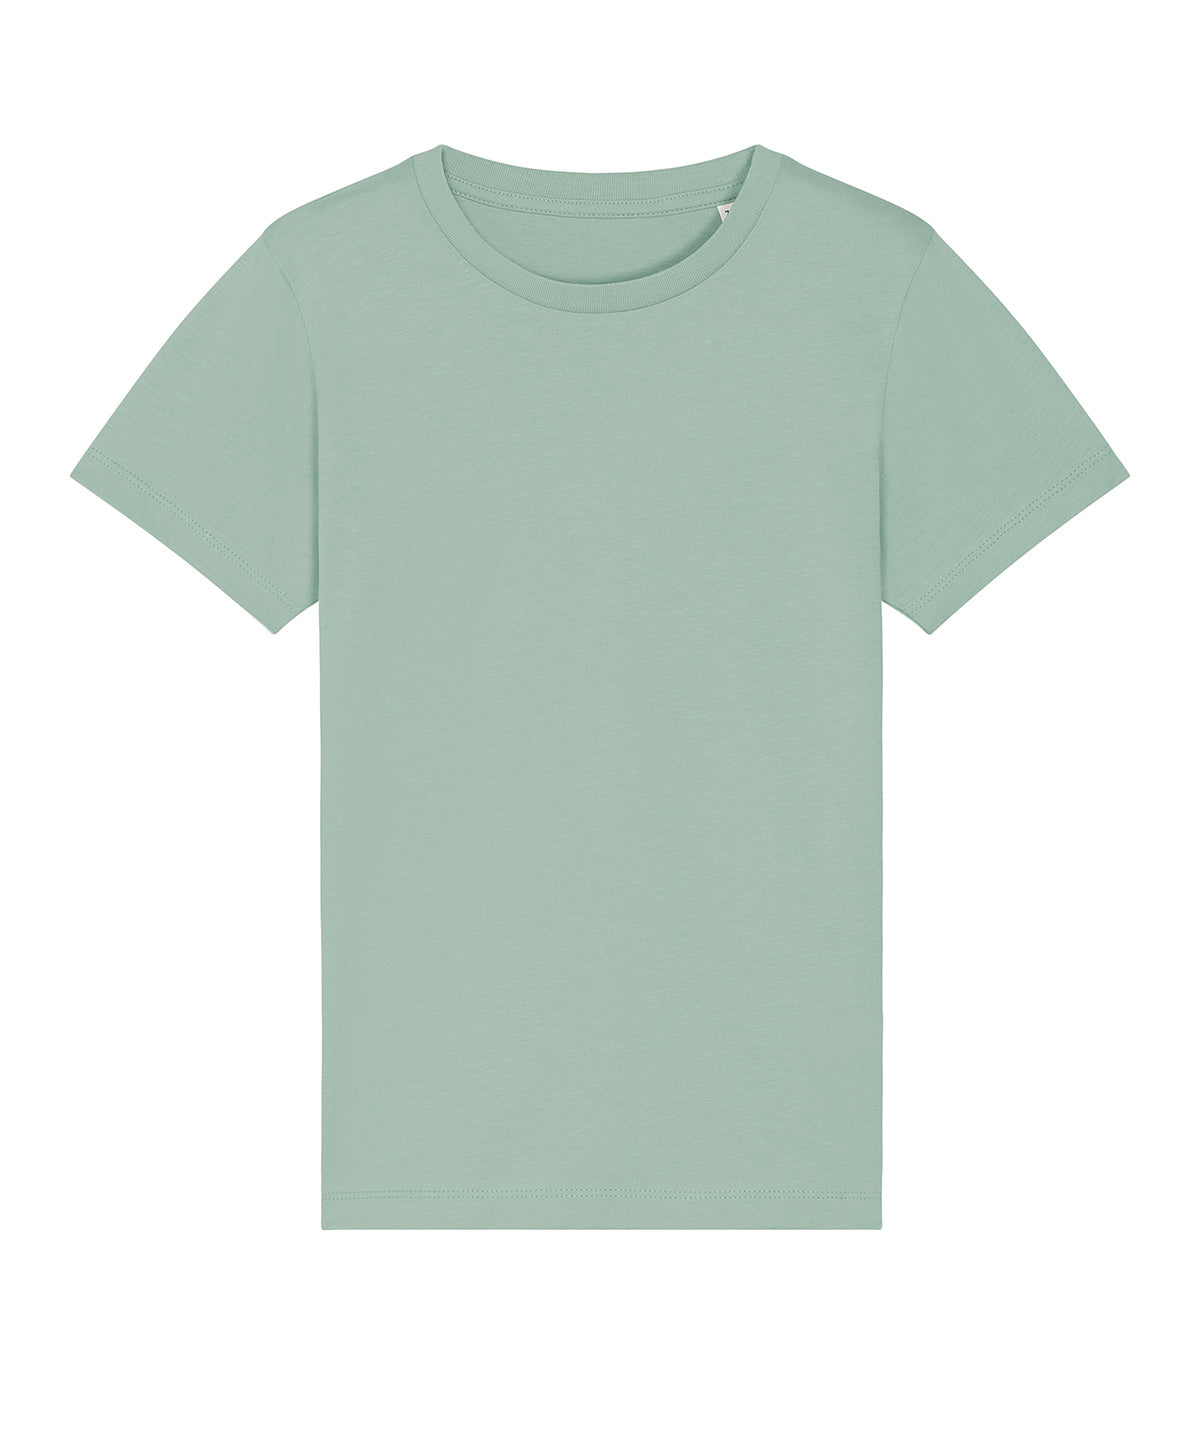 Aloe - Kids mini Creator iconic t-shirt (STTK909) T-Shirts Stanley/Stella 2022 Spring Edit, Exclusives, Junior, Must Haves, New Colours for 2021, New Colours For 2022, New Colours for 2023, Organic & Conscious, Raladeal - Recently Added, Raladeal - Stanley Stella, Stanley/ Stella, T-Shirts & Vests Schoolwear Centres